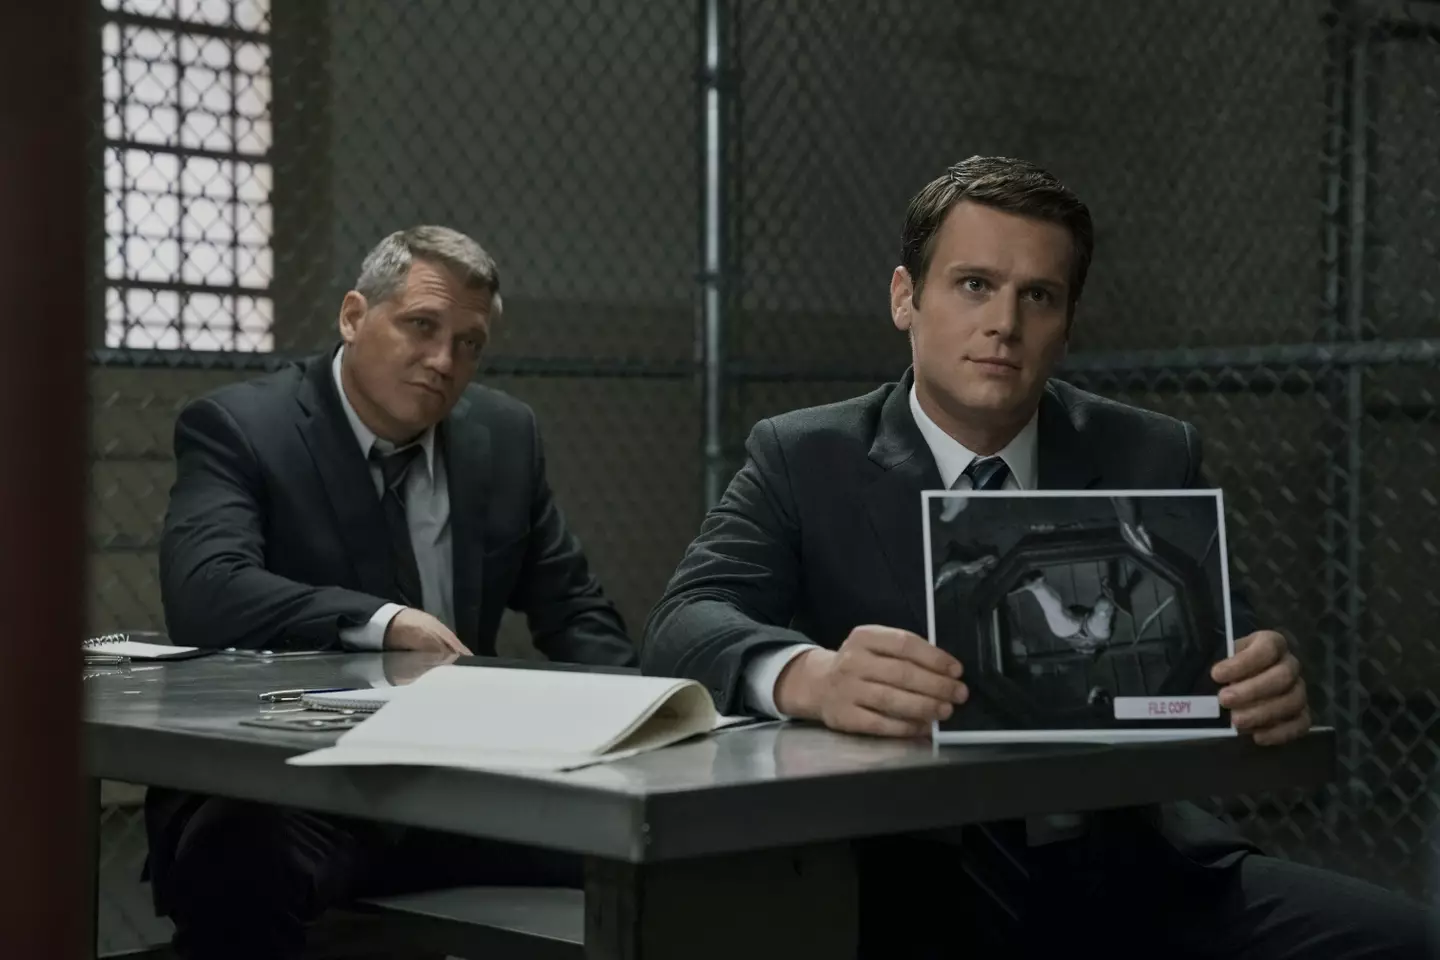 Mindhunter told the tale of an elite FBI team exploring the minds of serial killers.